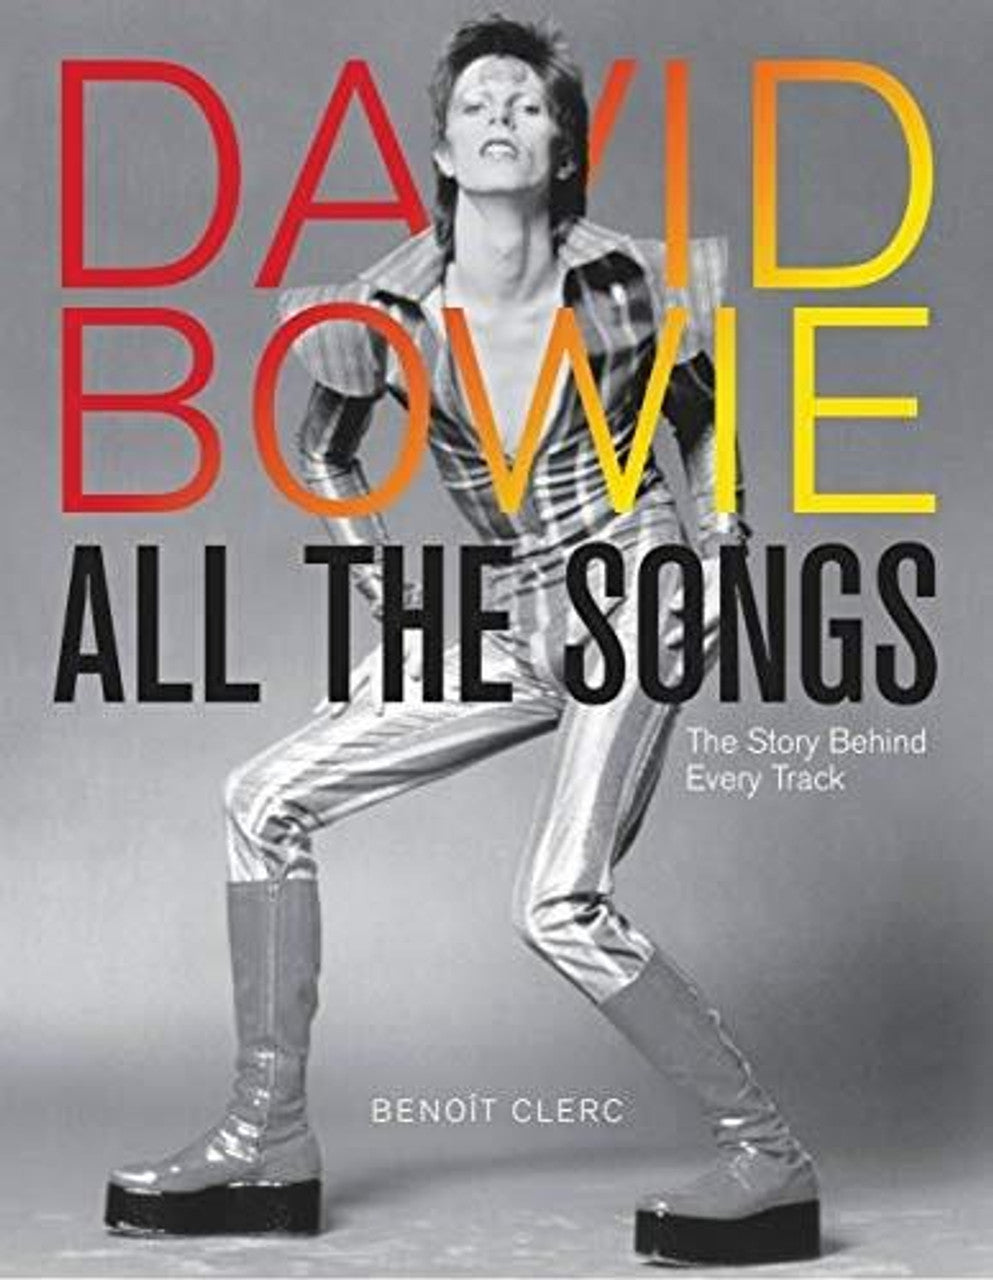 DAVID BOWIE - ALL THE SONGS: THE STORY BEHIND EVERY TRACK - HARDCOVER - BOOK